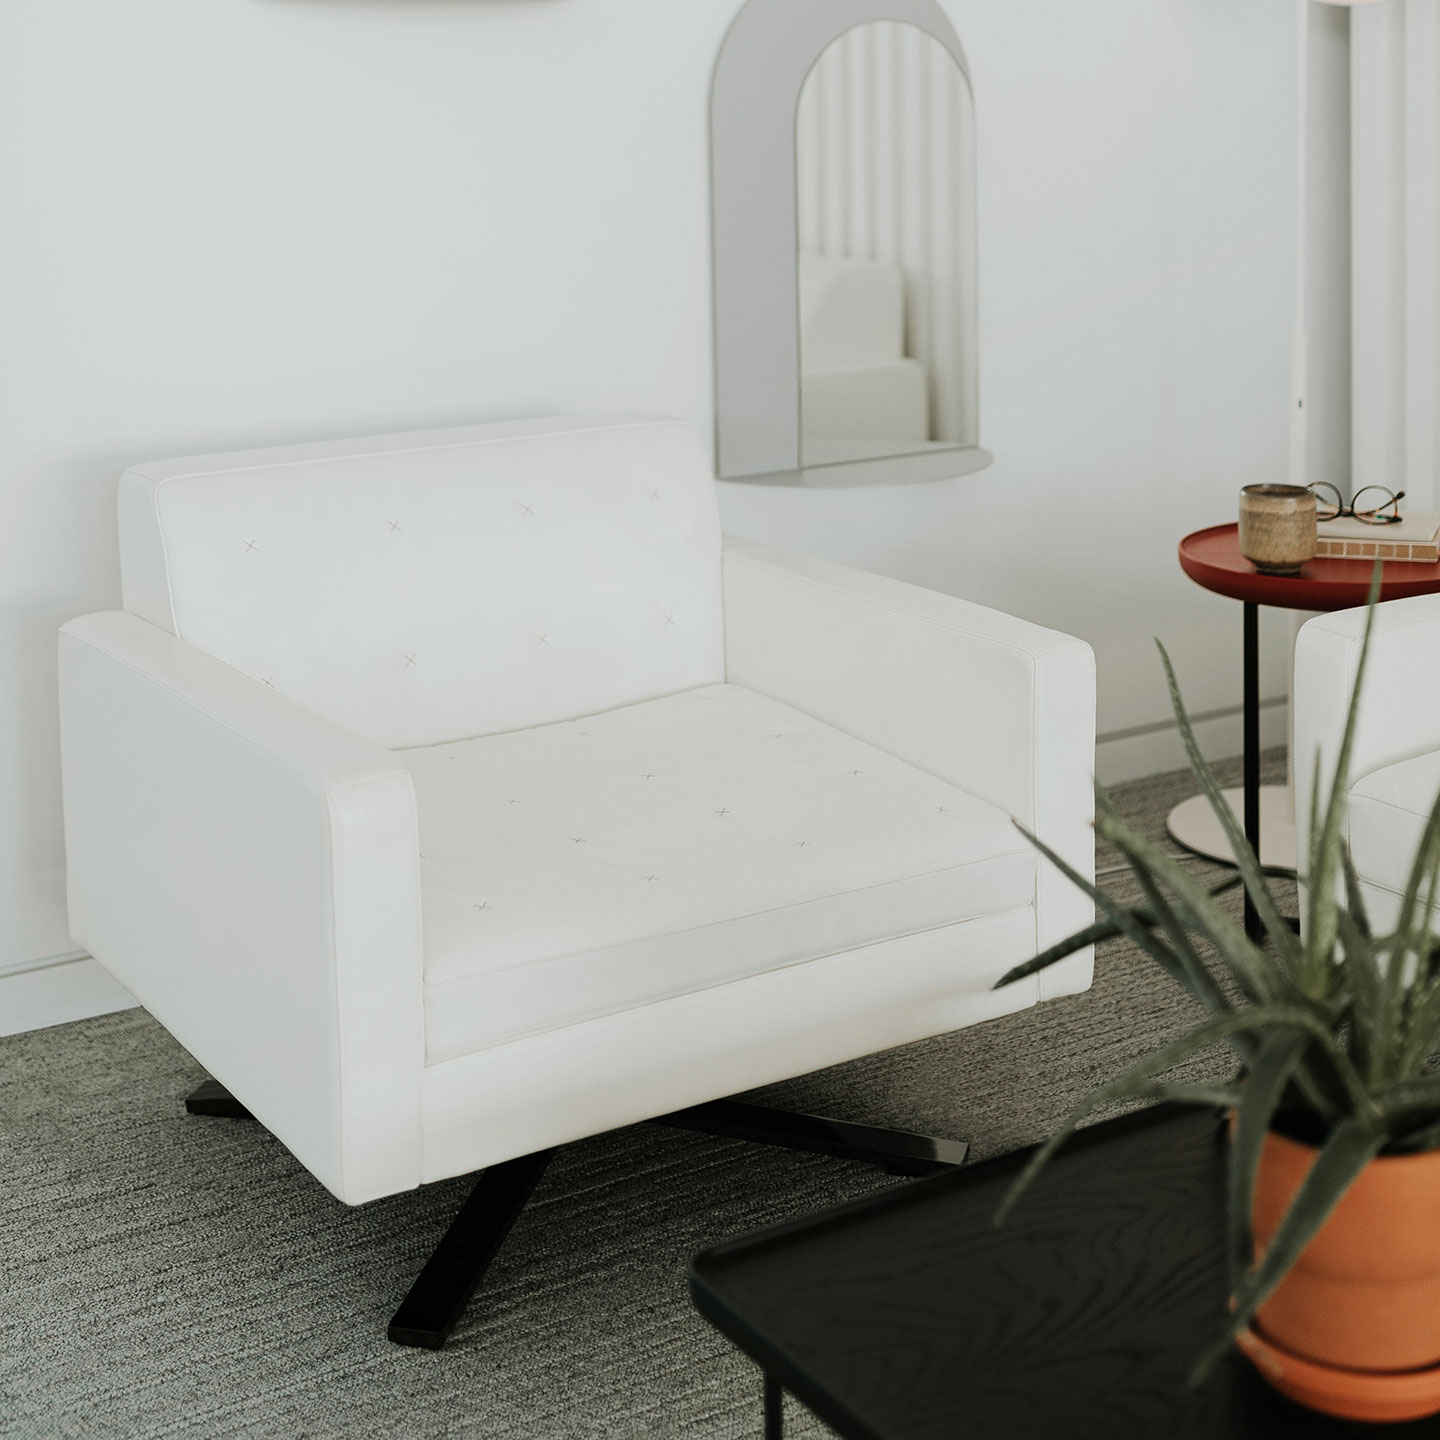 Haworth Kennedee lounge sofa in white upholstery in a casual space